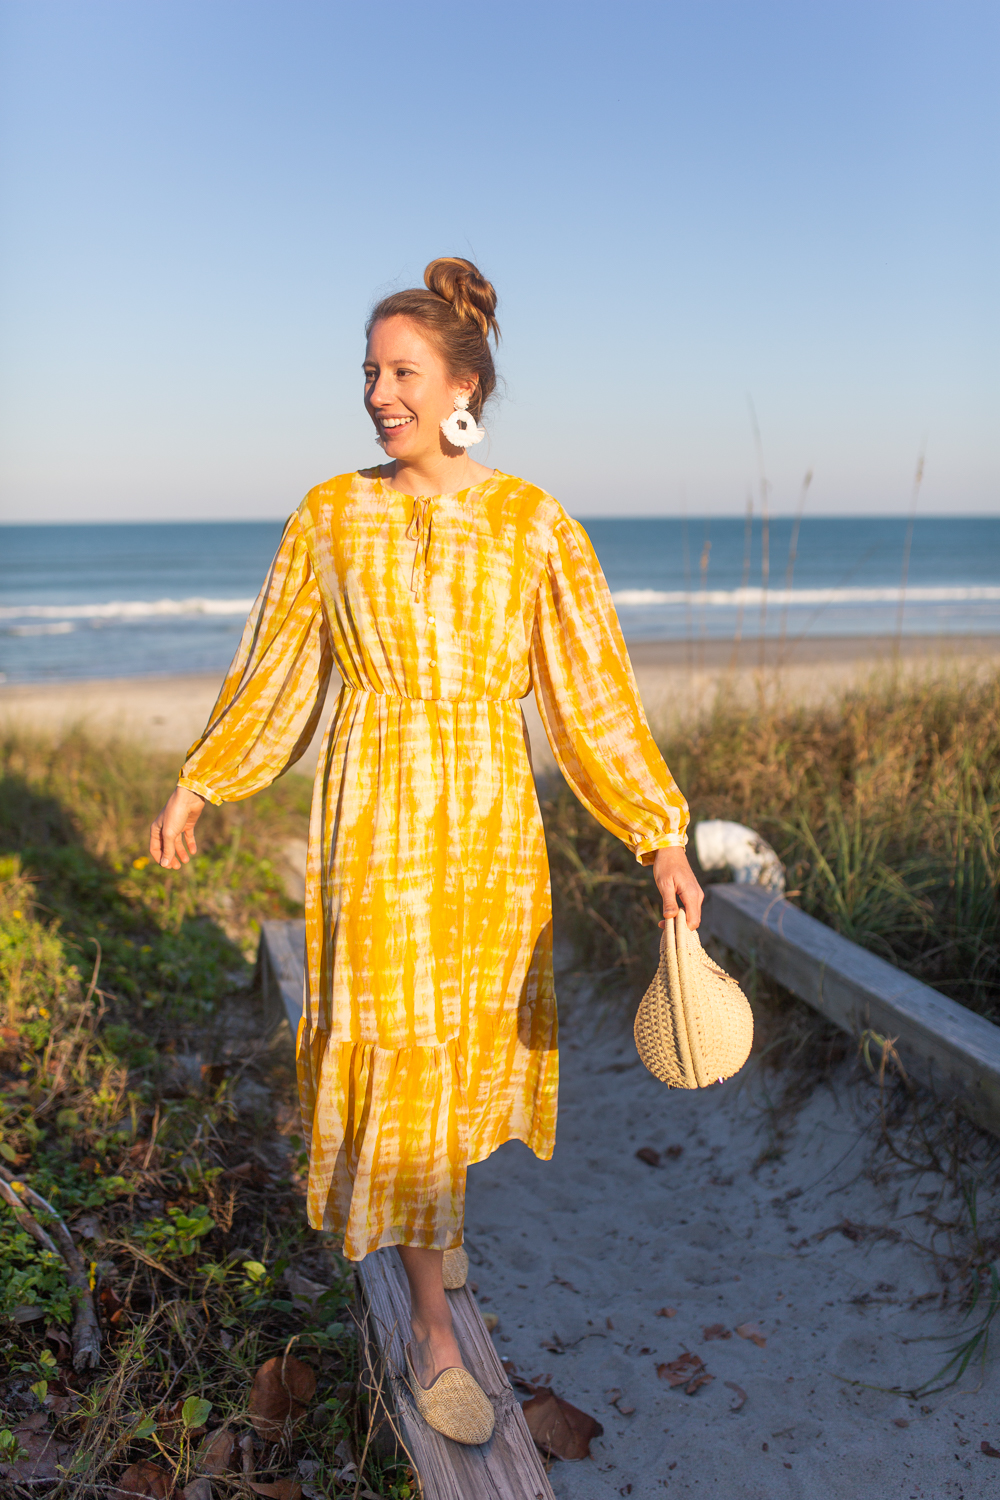 Bright Spring Dresses for Everyday / Yellow Spring Dresses / Bright Dresses to Add Happiness To Your Day / Spring Dress Inspiration / What to Wear on a Tropical Vacation - Sunshine Style, A Florida Fashion and Lifestyle Blog by Katie